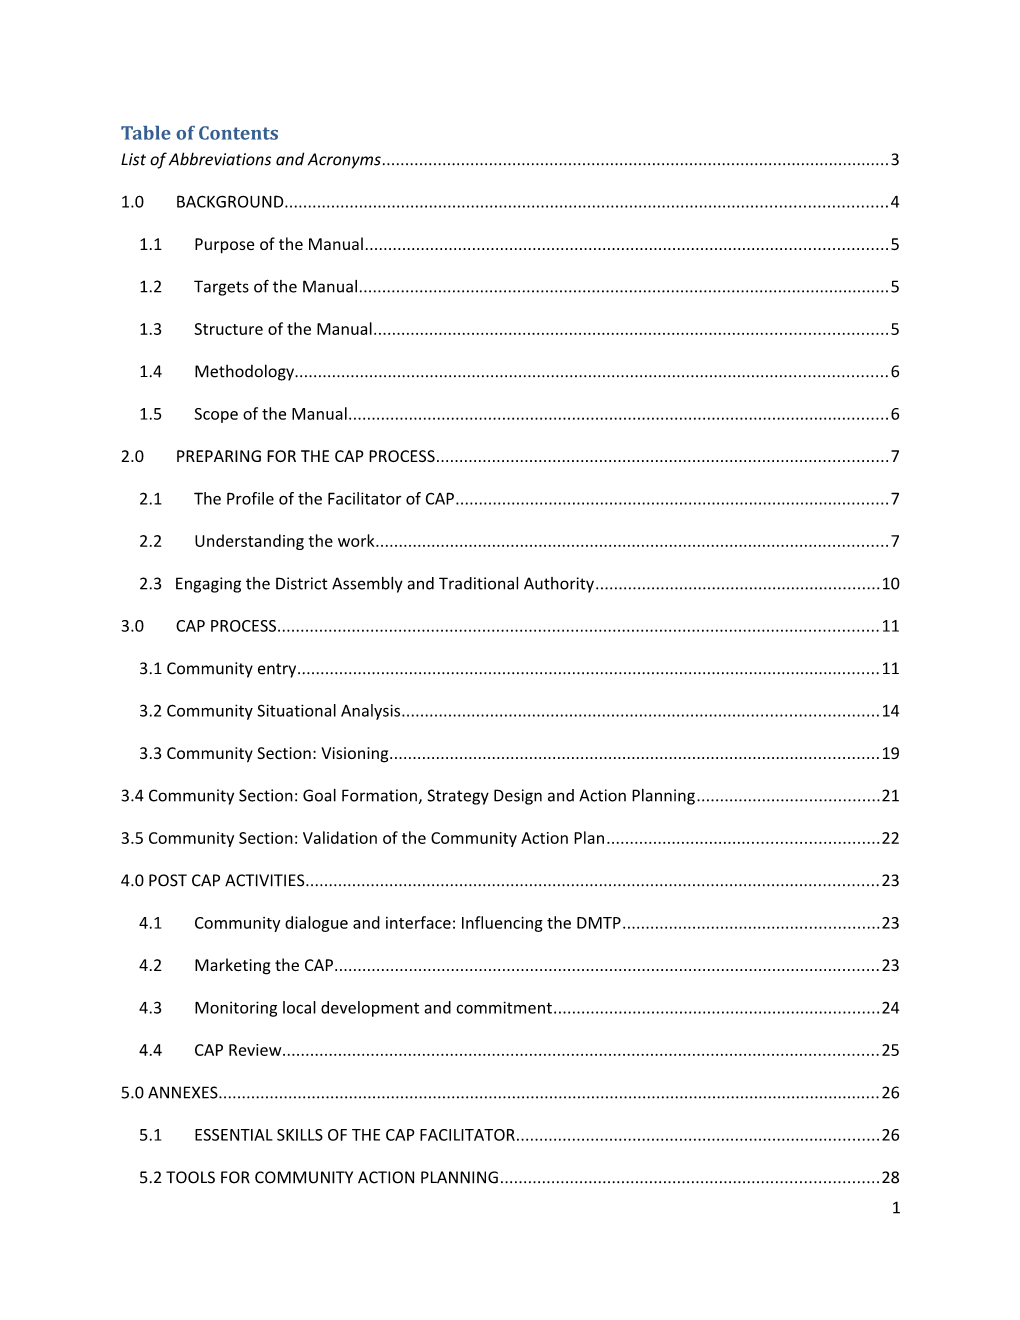 Table of Contents s480